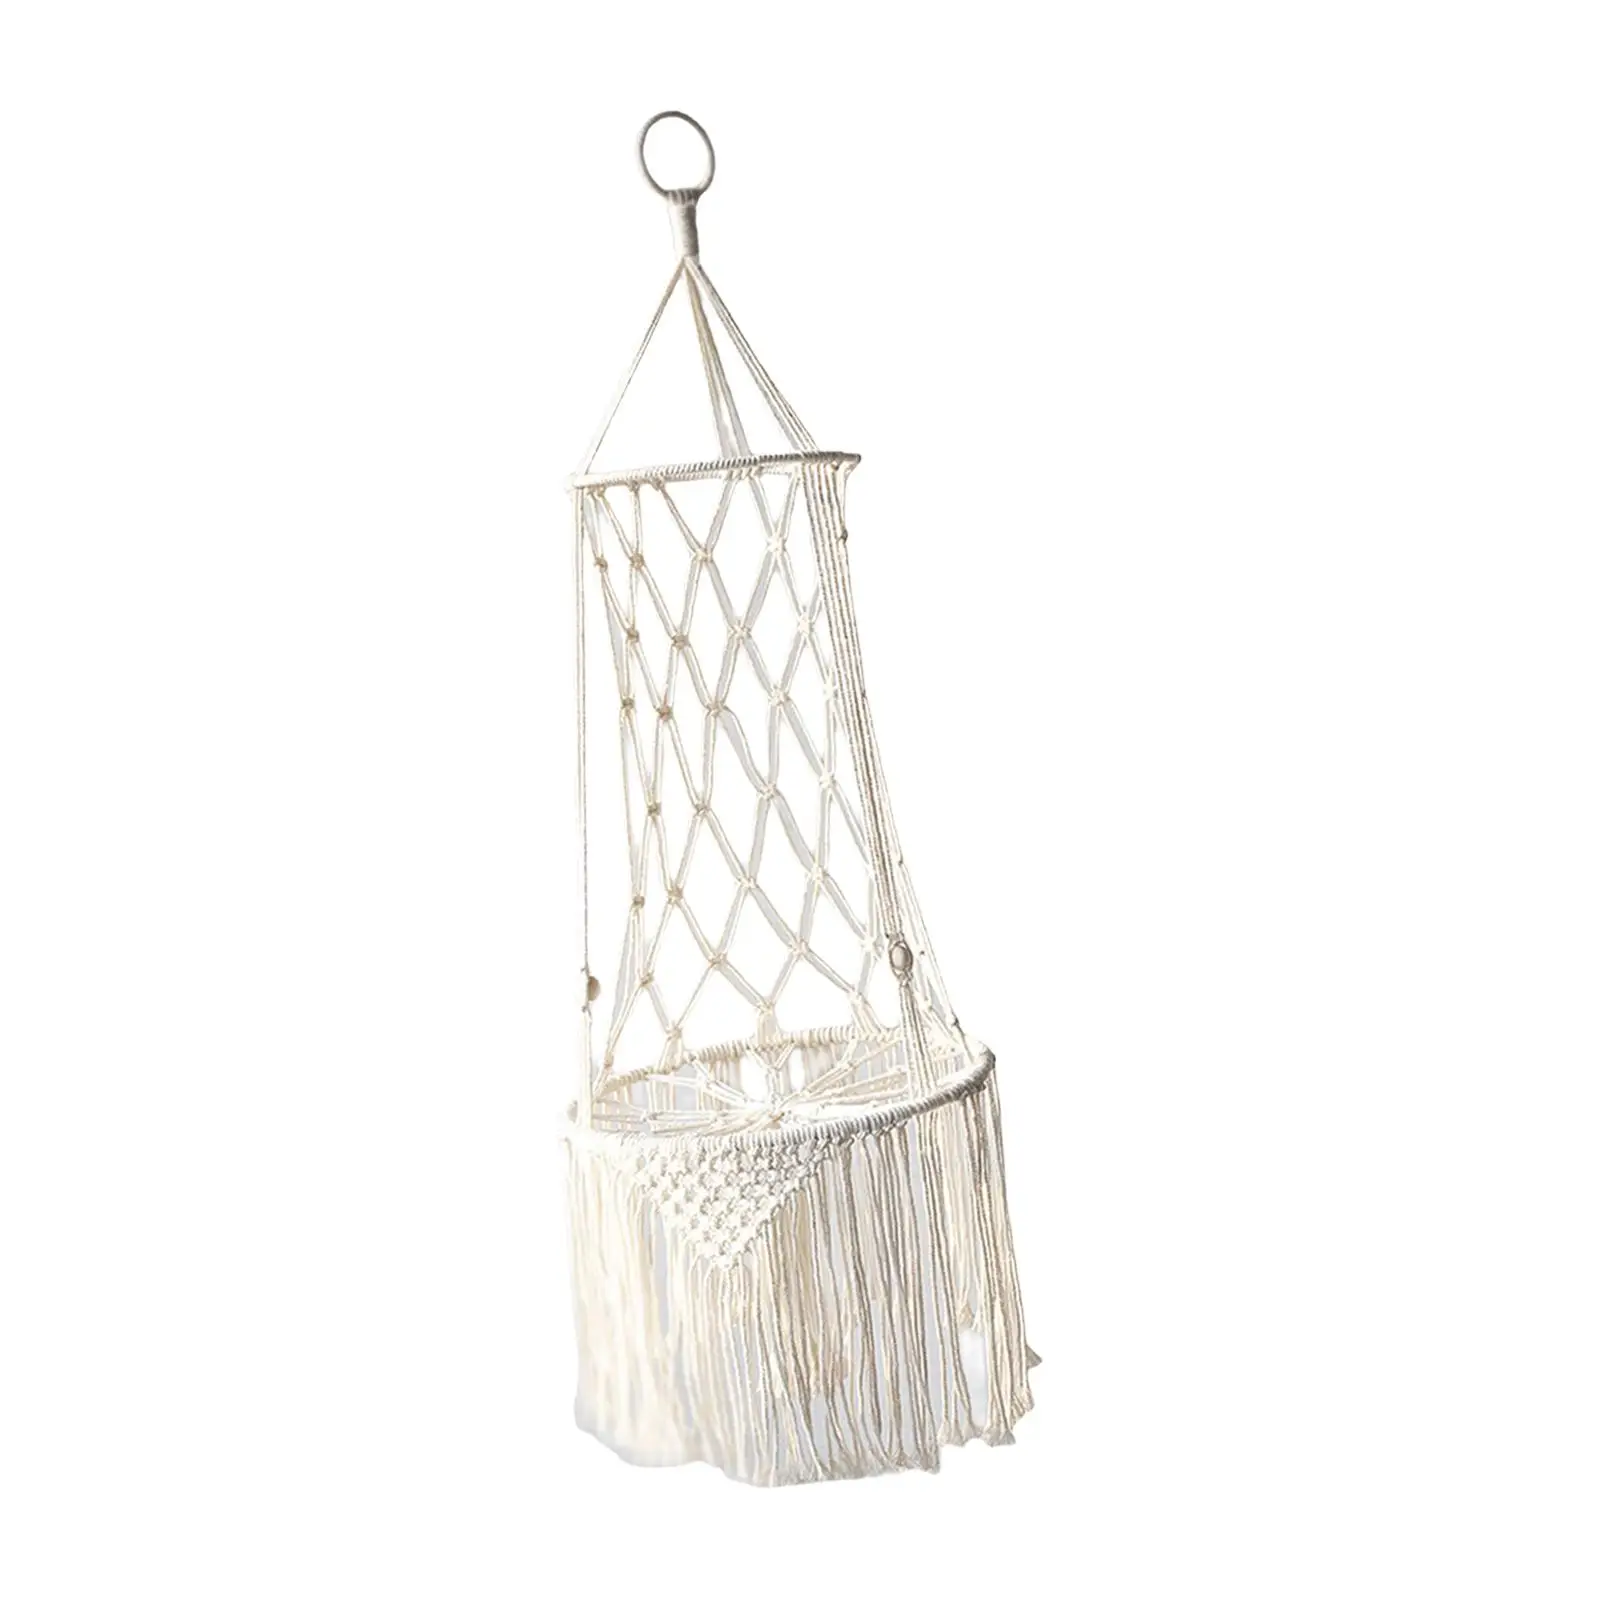 Macrame Cat Hammock Decorative Boho Tapestry Gifts Hand Woven Tassel Hanging Pet Swing Bed House for Indoor Outdoor Wall